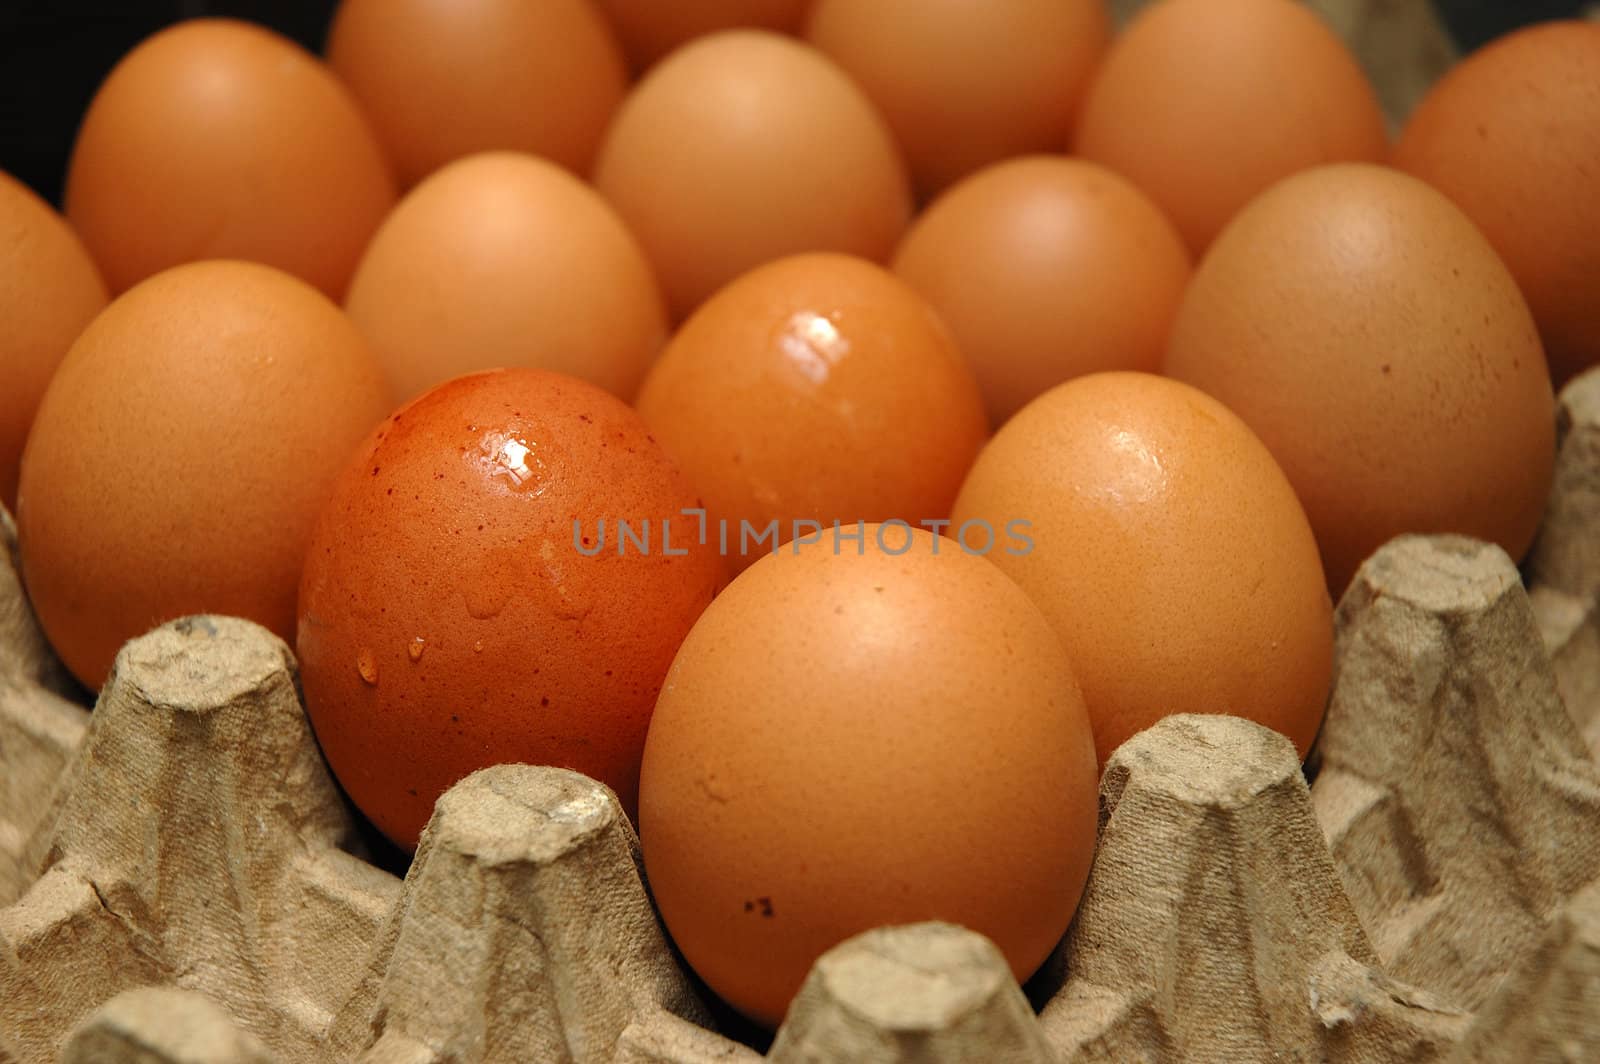 egg that contain a good nutrition for body